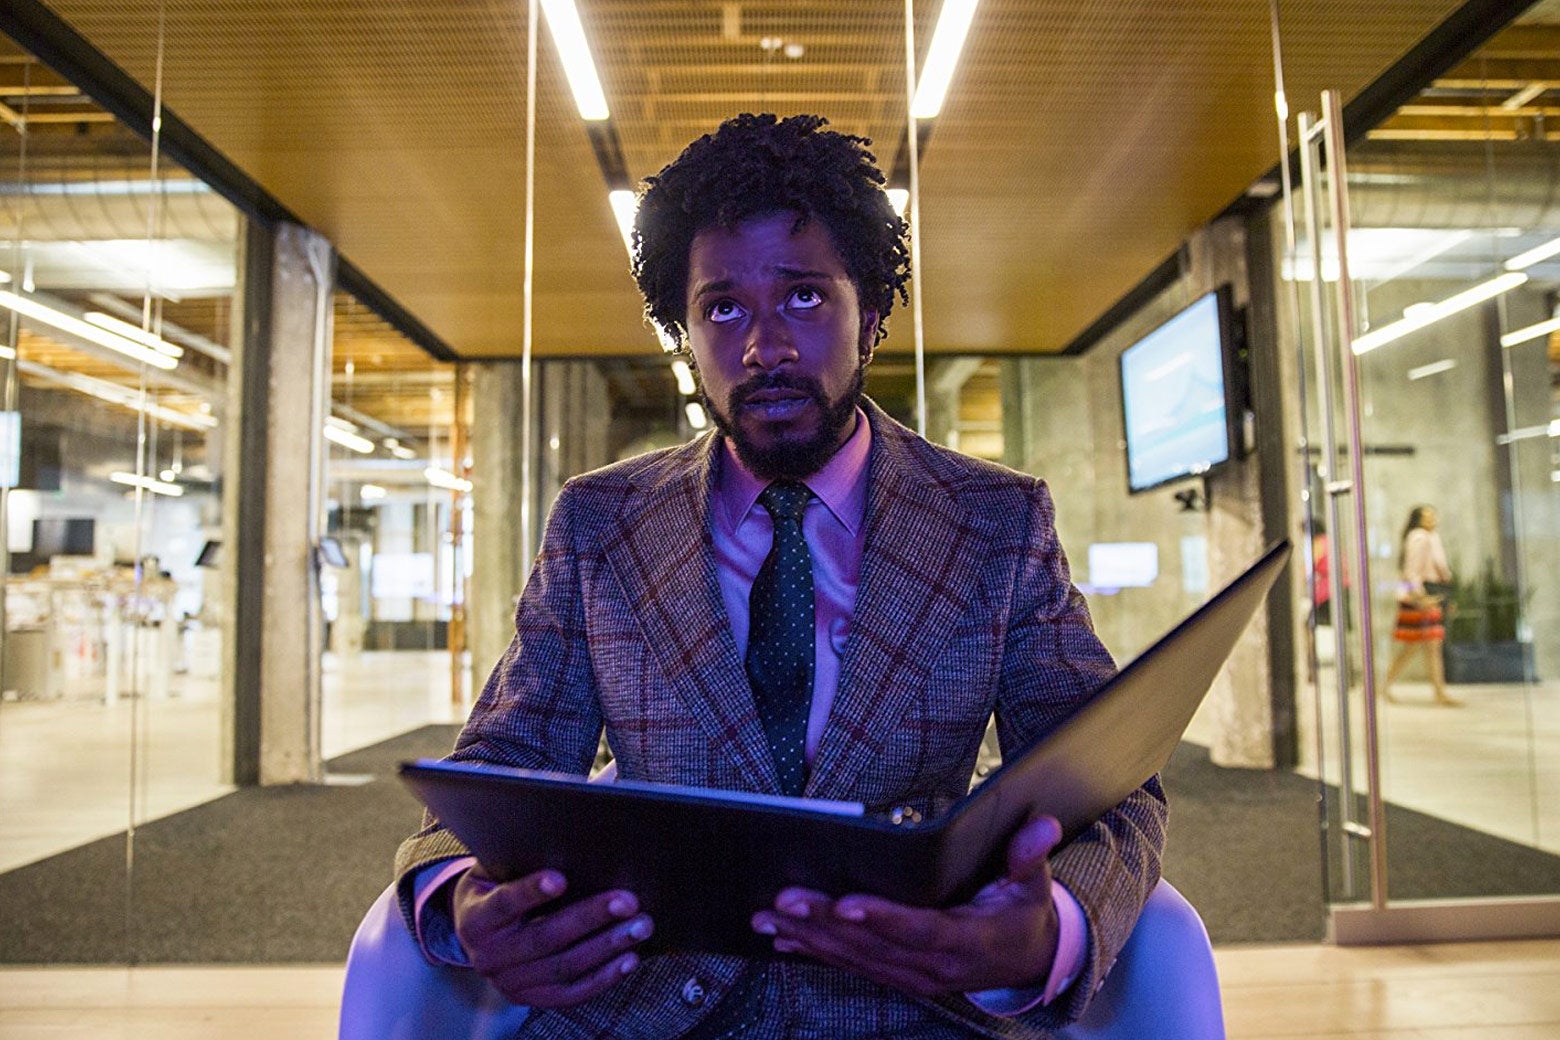 Lakeith Stanfield’s character holds open a binder, while in an office setting.